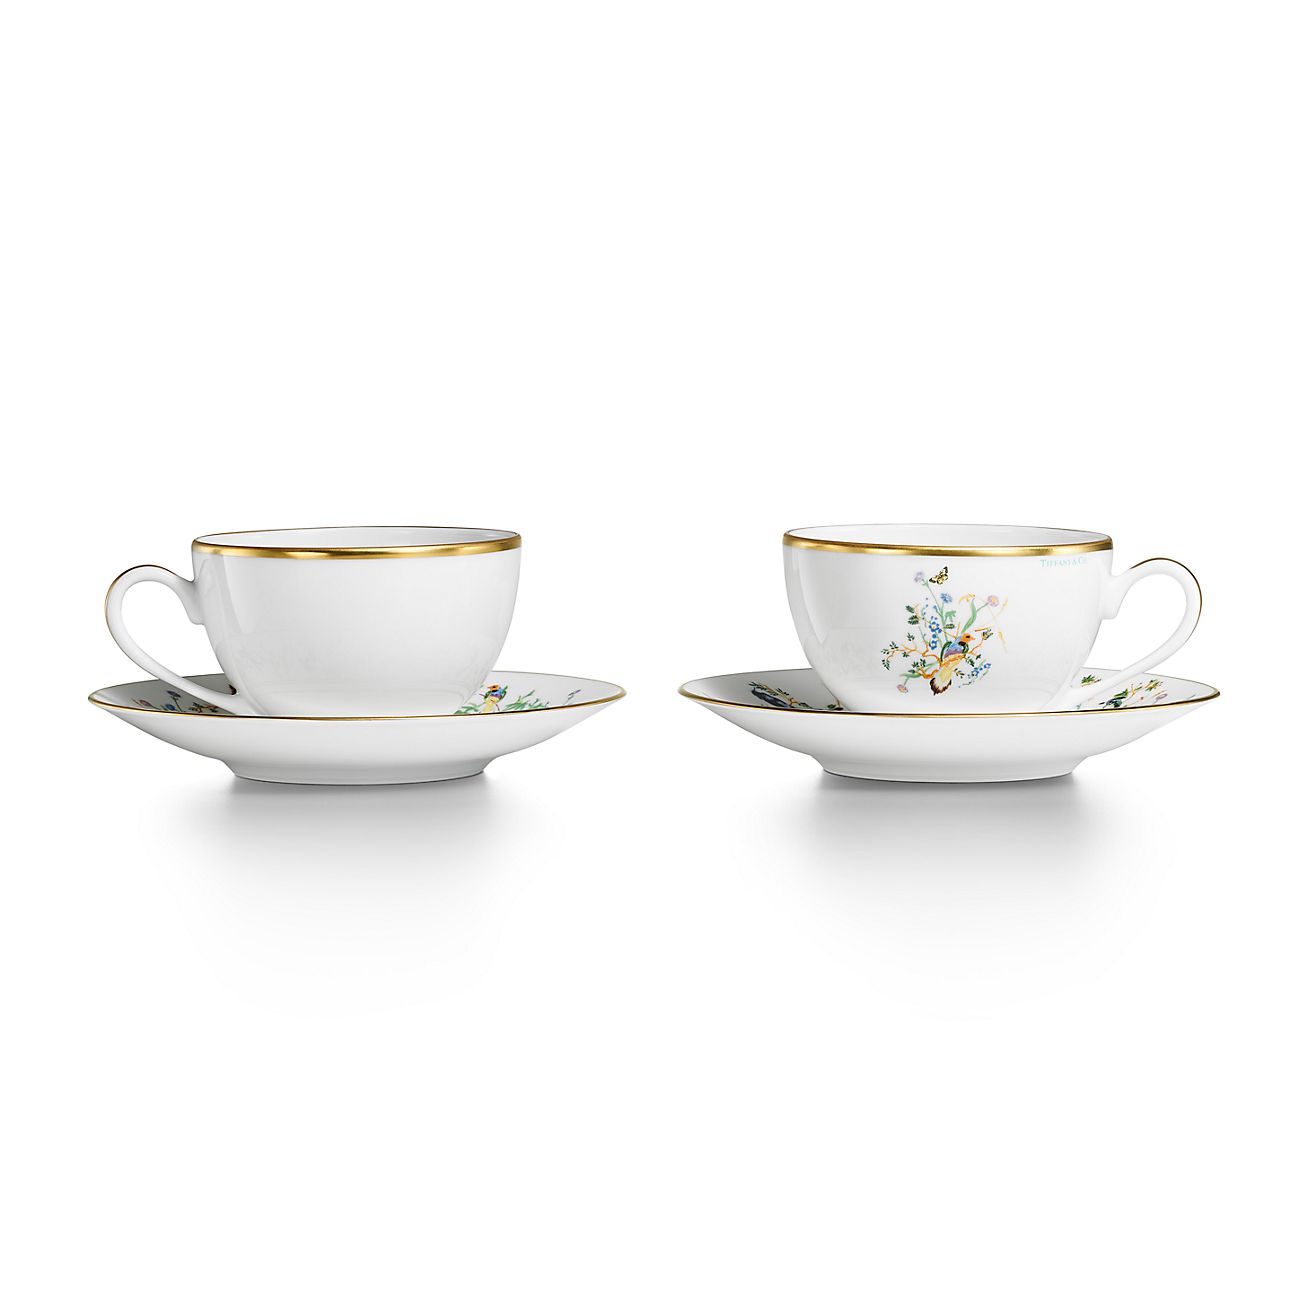 Tiffany & Co Tiffany Audubon Teacup And Saucer In Porcelain In Gold